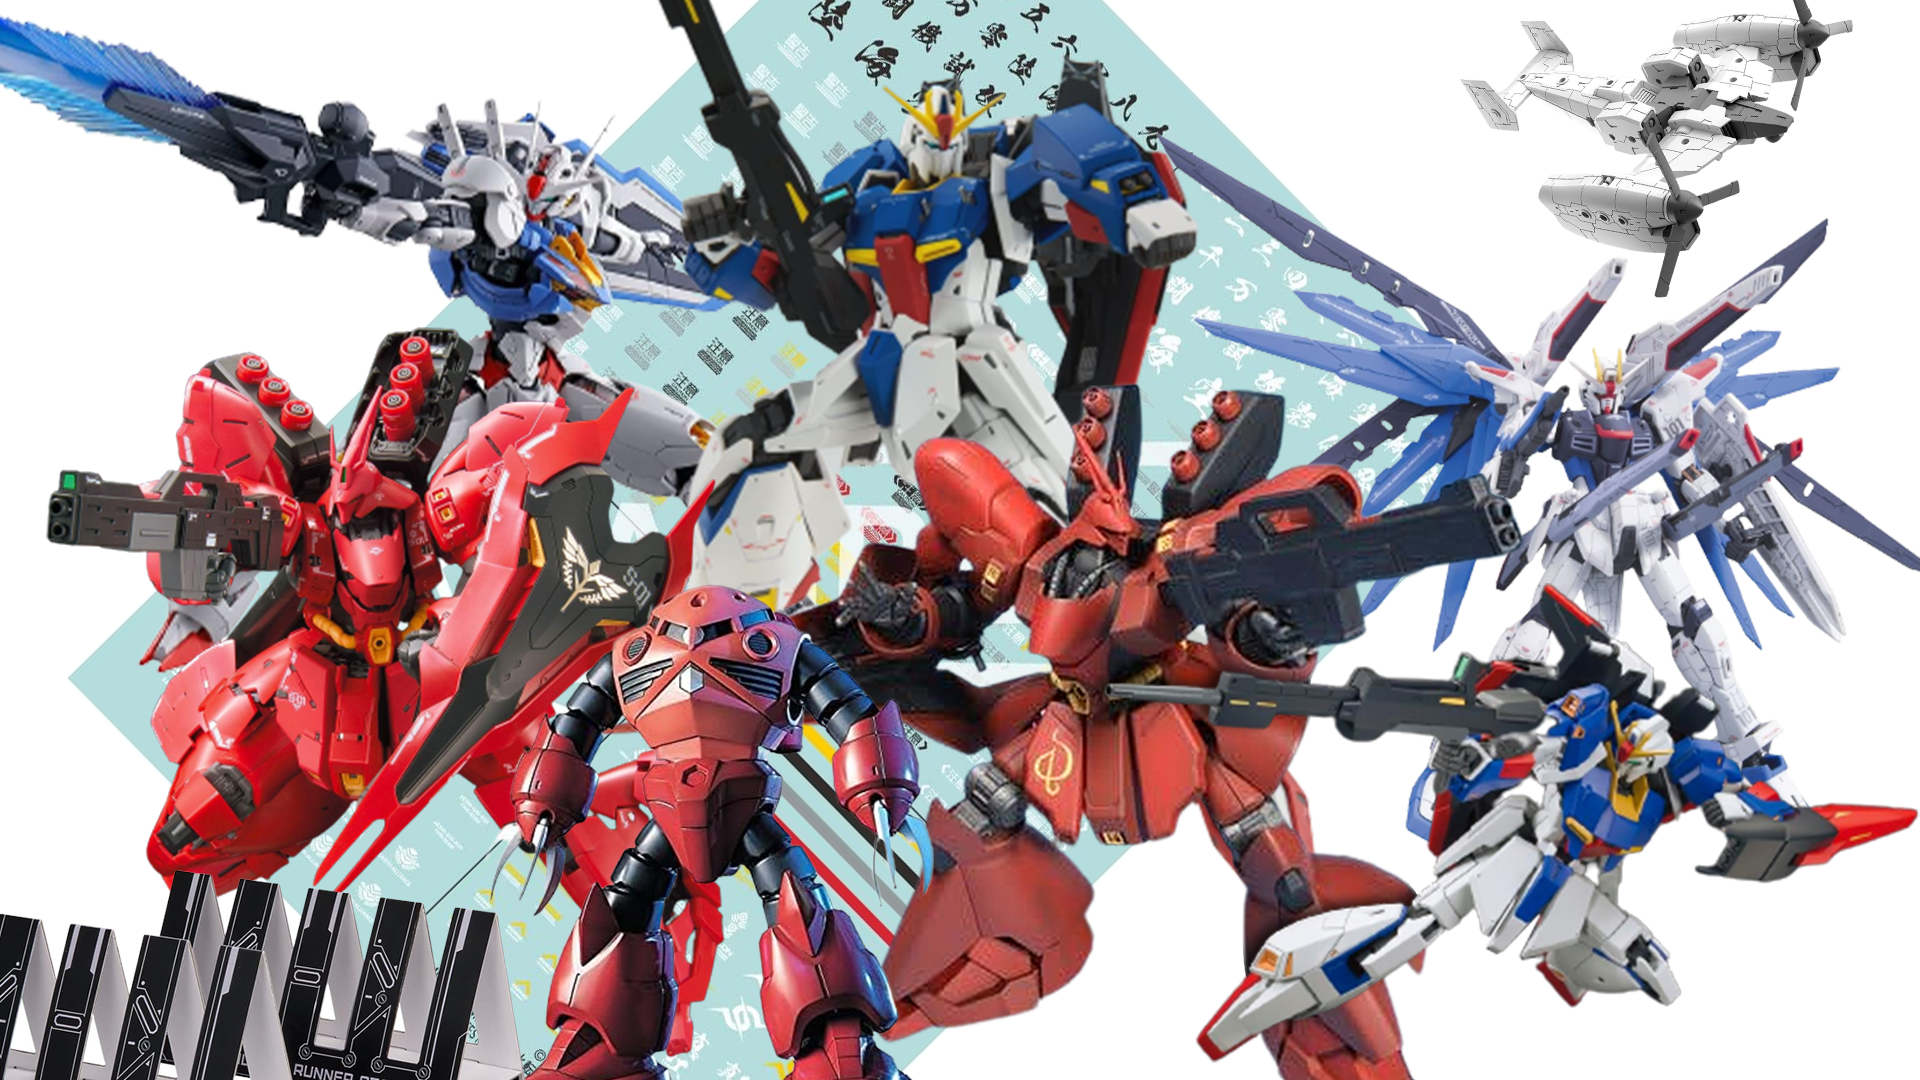 Check It Out!!! Our Latest Gunpla PO You Wouldn't Want To Miss